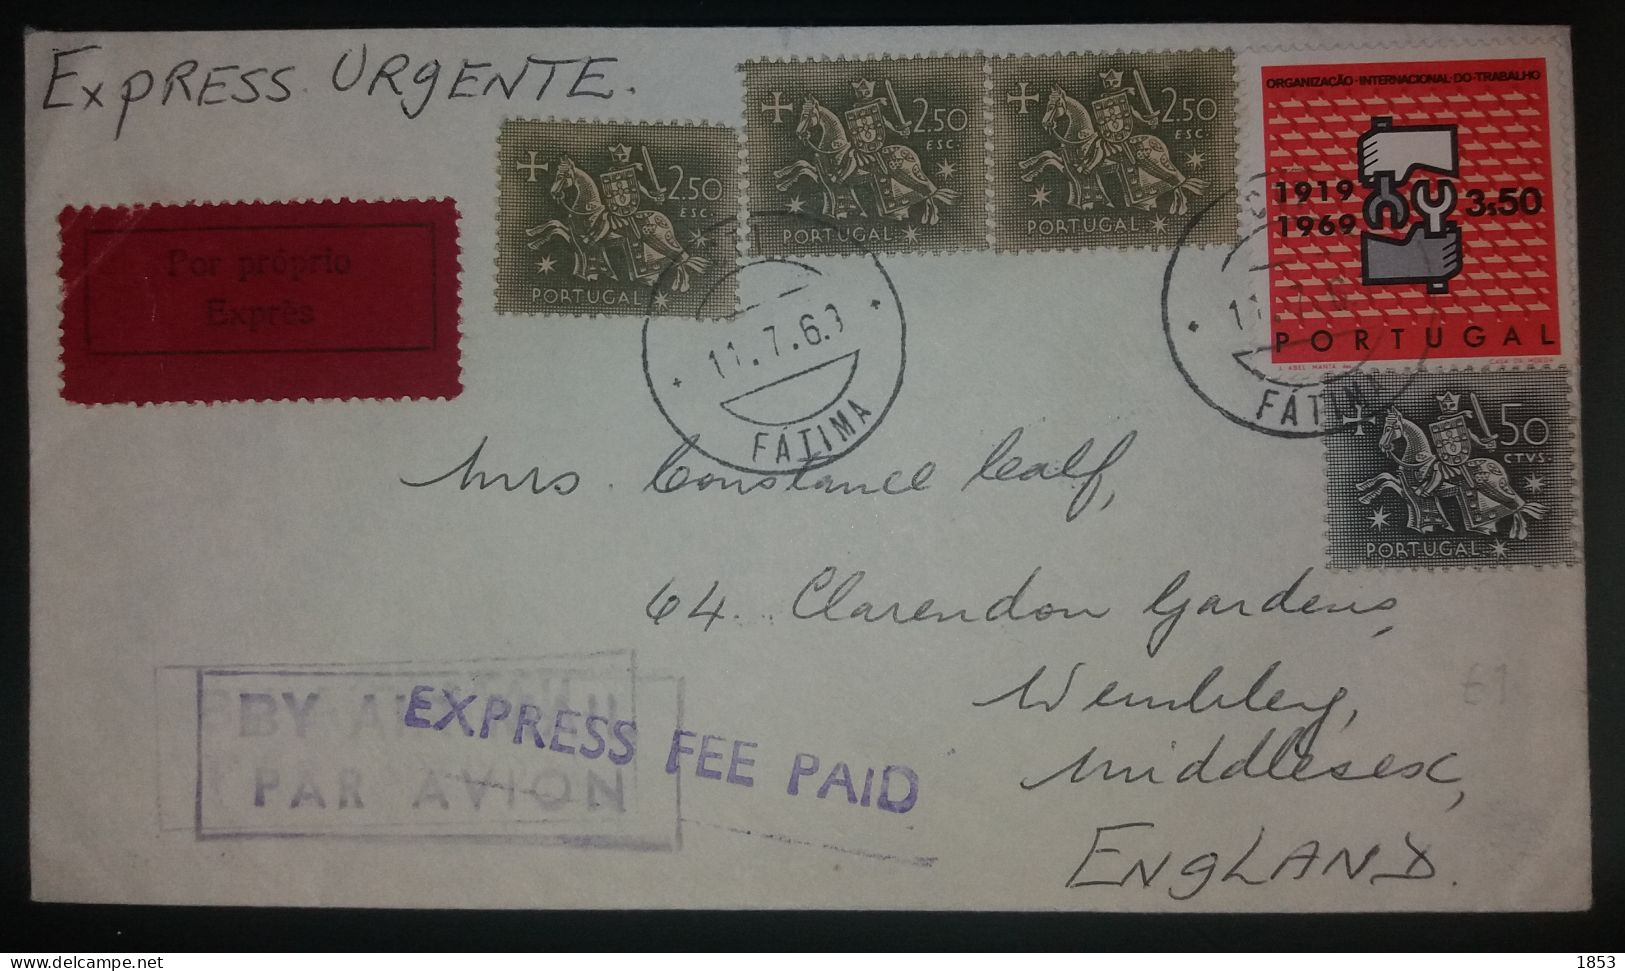 TIPO D.DINIS - CAVALINHO - EXPRESS URGENTE - EXPRESS FEE PAID - Lettres & Documents